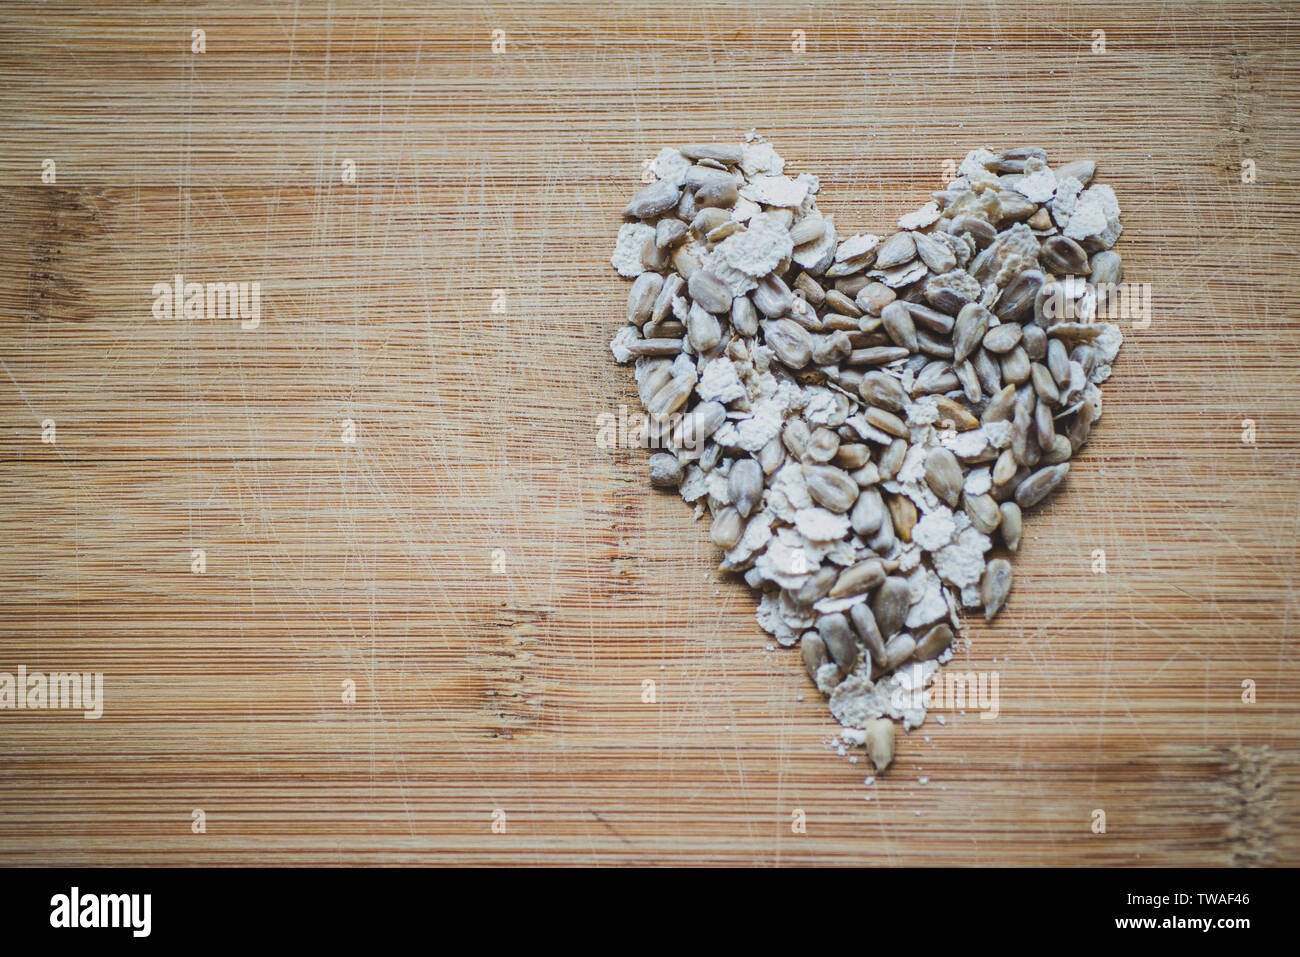 grains and oats on a wooden board Stock Photo